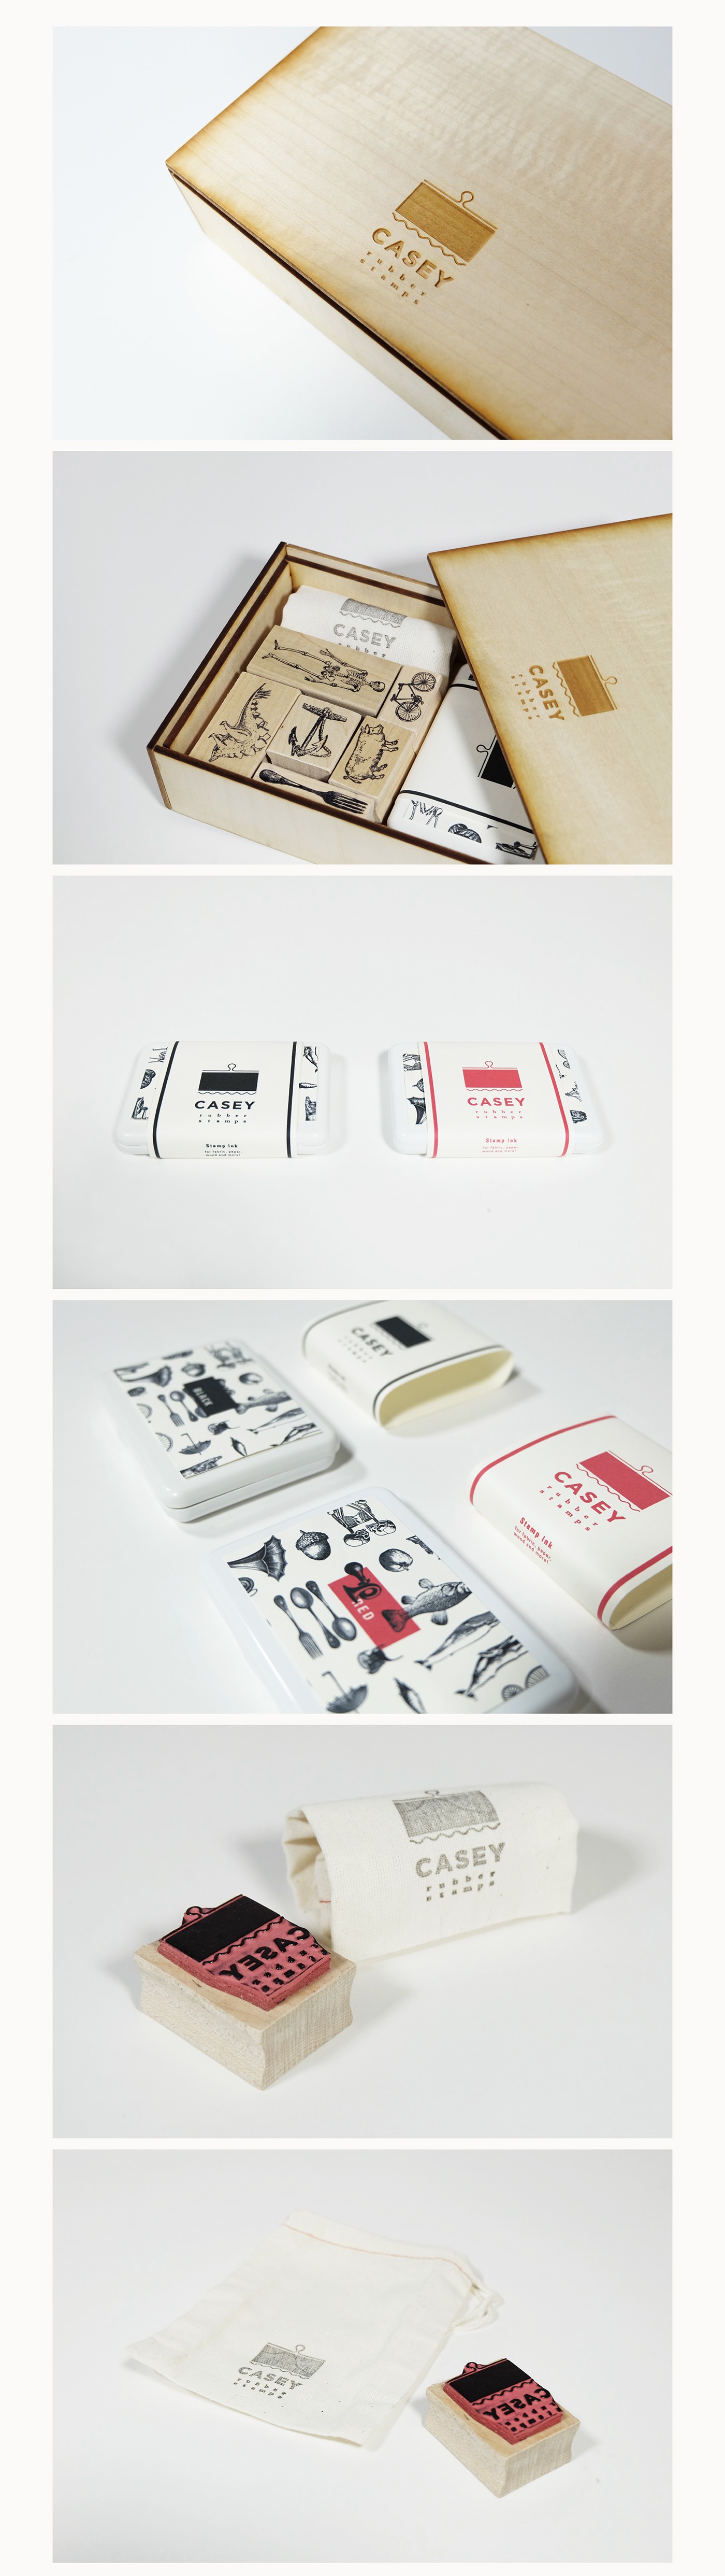 Casey Rubber Stamps Rubber Stamp casey Identity Design graphic logo pattern poster package gift box silk screen